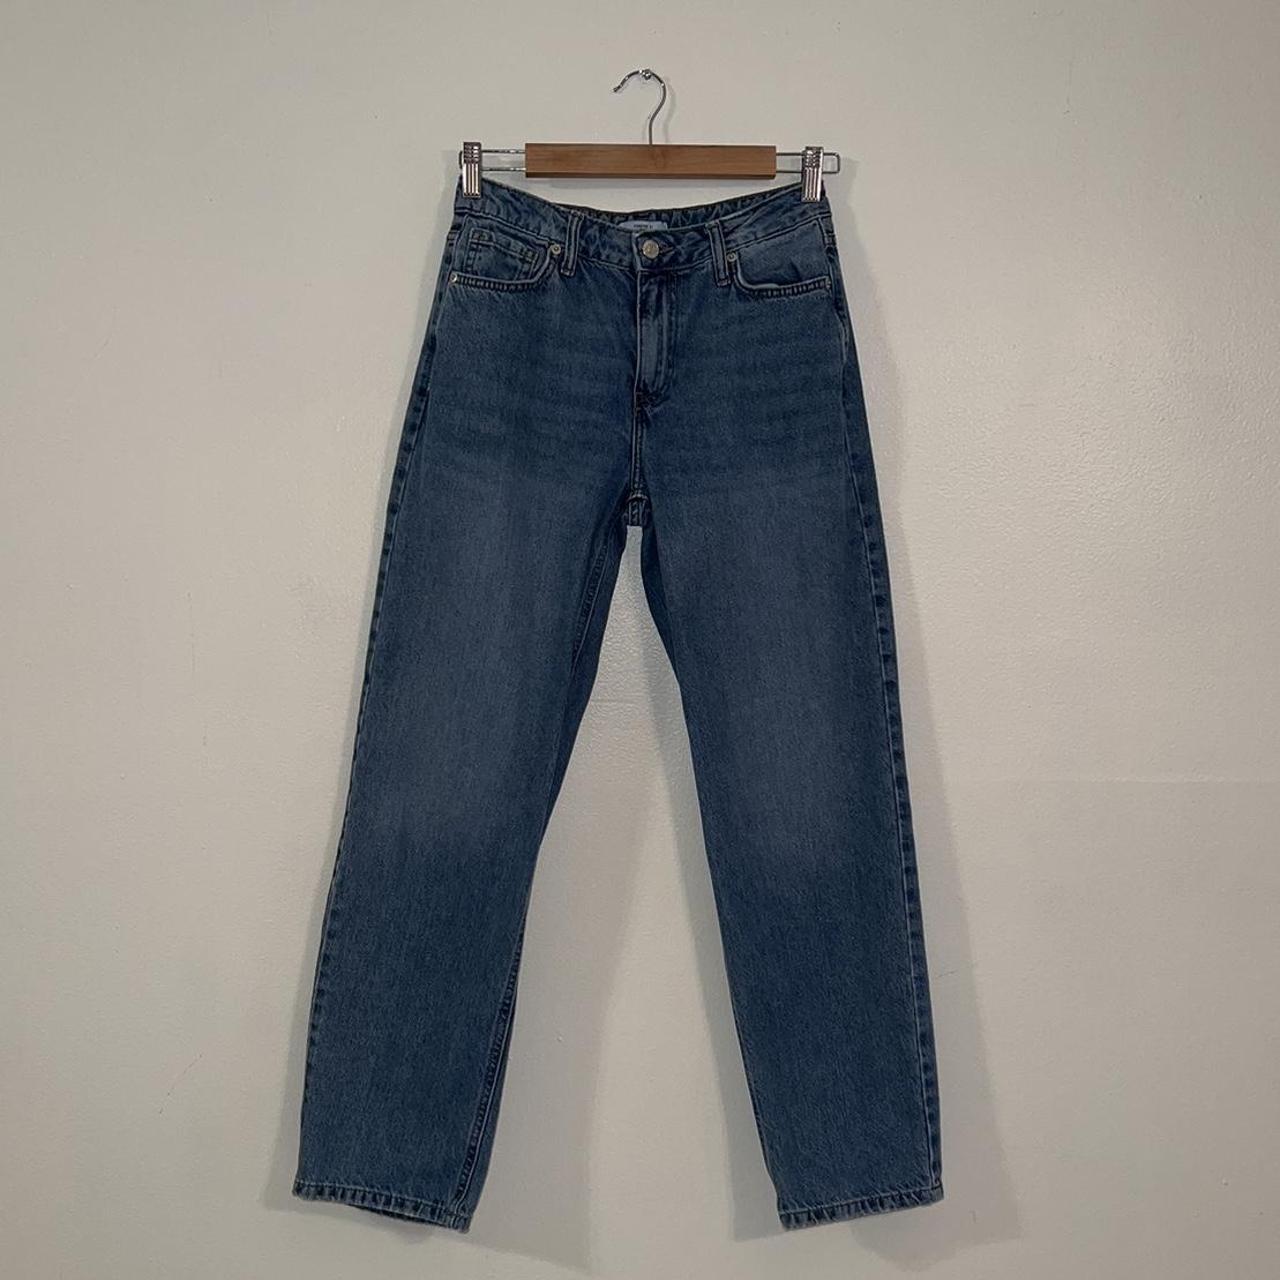 Medium washed mid rise 90’s jeans - Depop